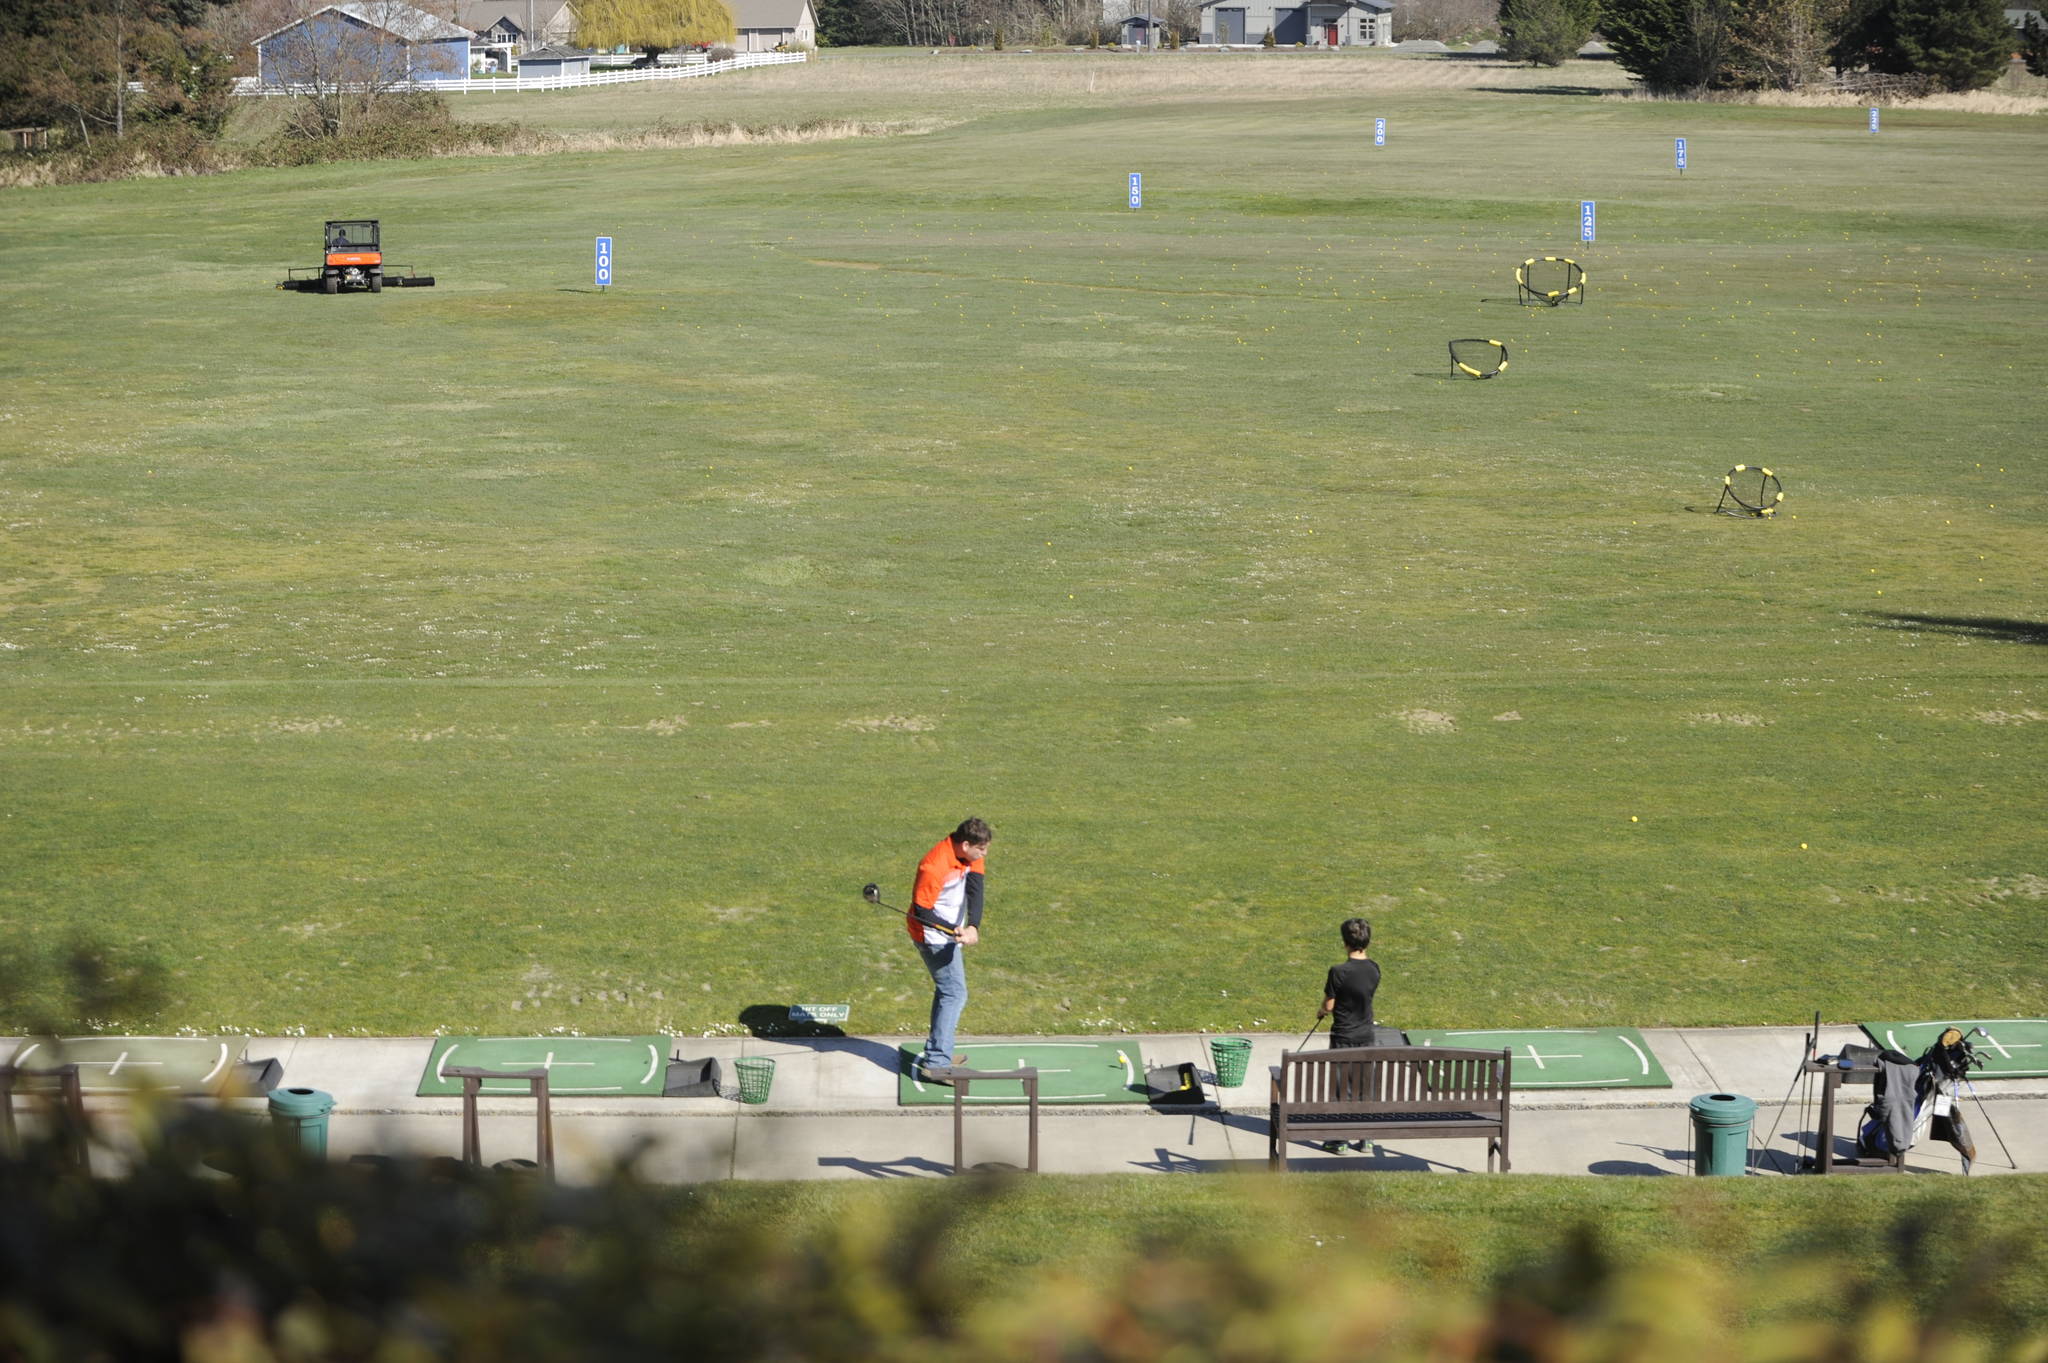 A few golfers get some swings in at The Cedars at Dungeness golf course’s driving range last week. The course closed this week in light of Gov. Jay Inslee’s “stay at home” order. Sequim Gazette file photo by Michael Dashiell